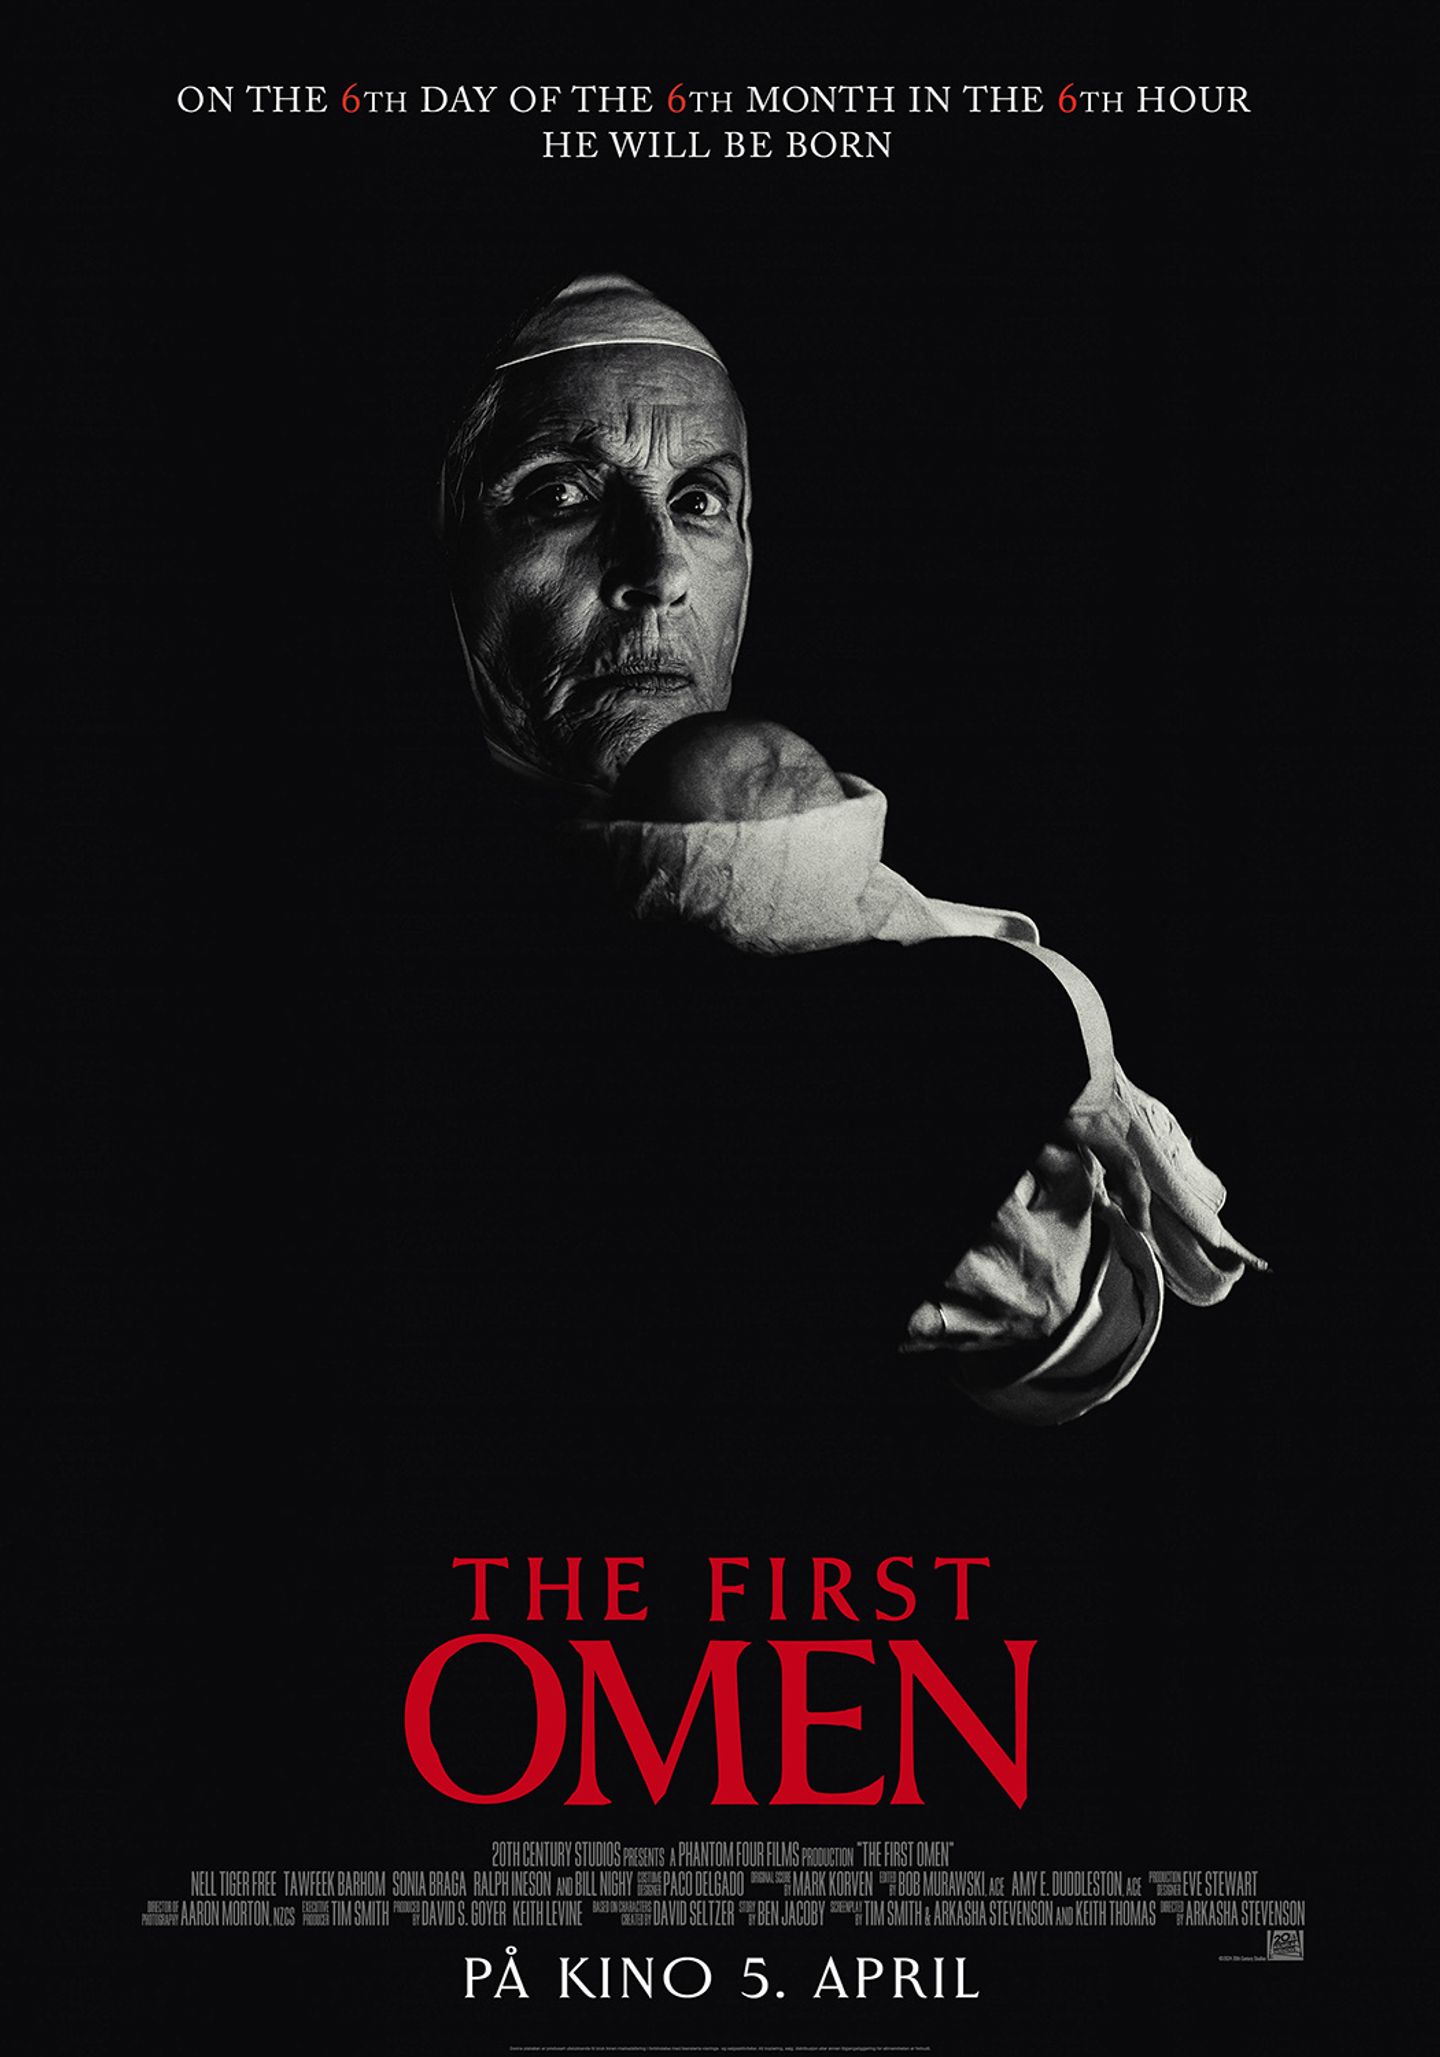 Plakat for 'The First Omen'